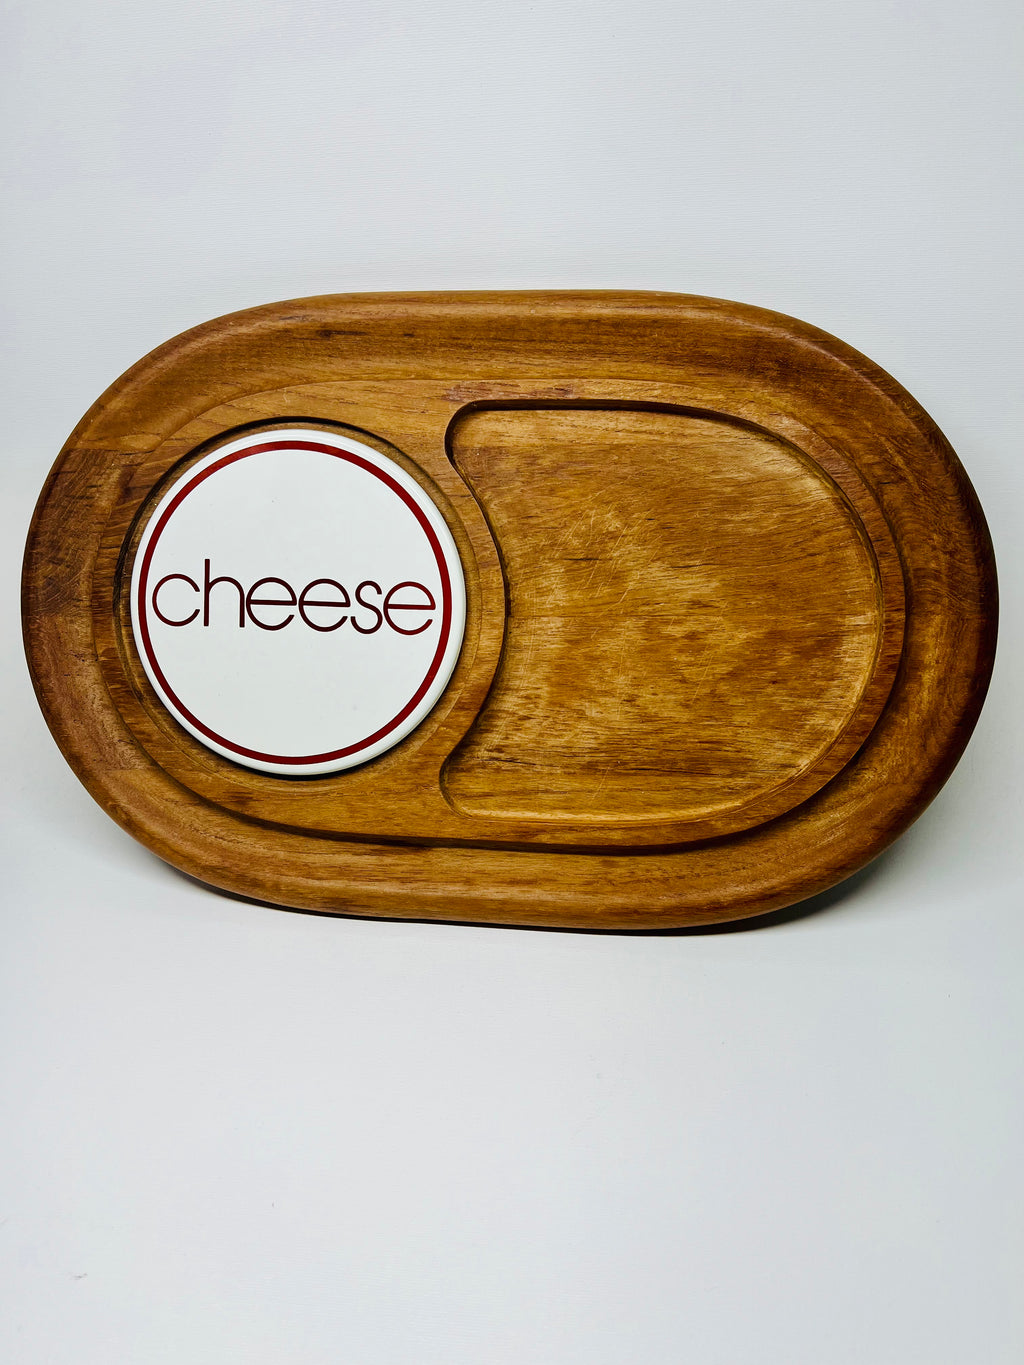 Vintage Cheese Tray